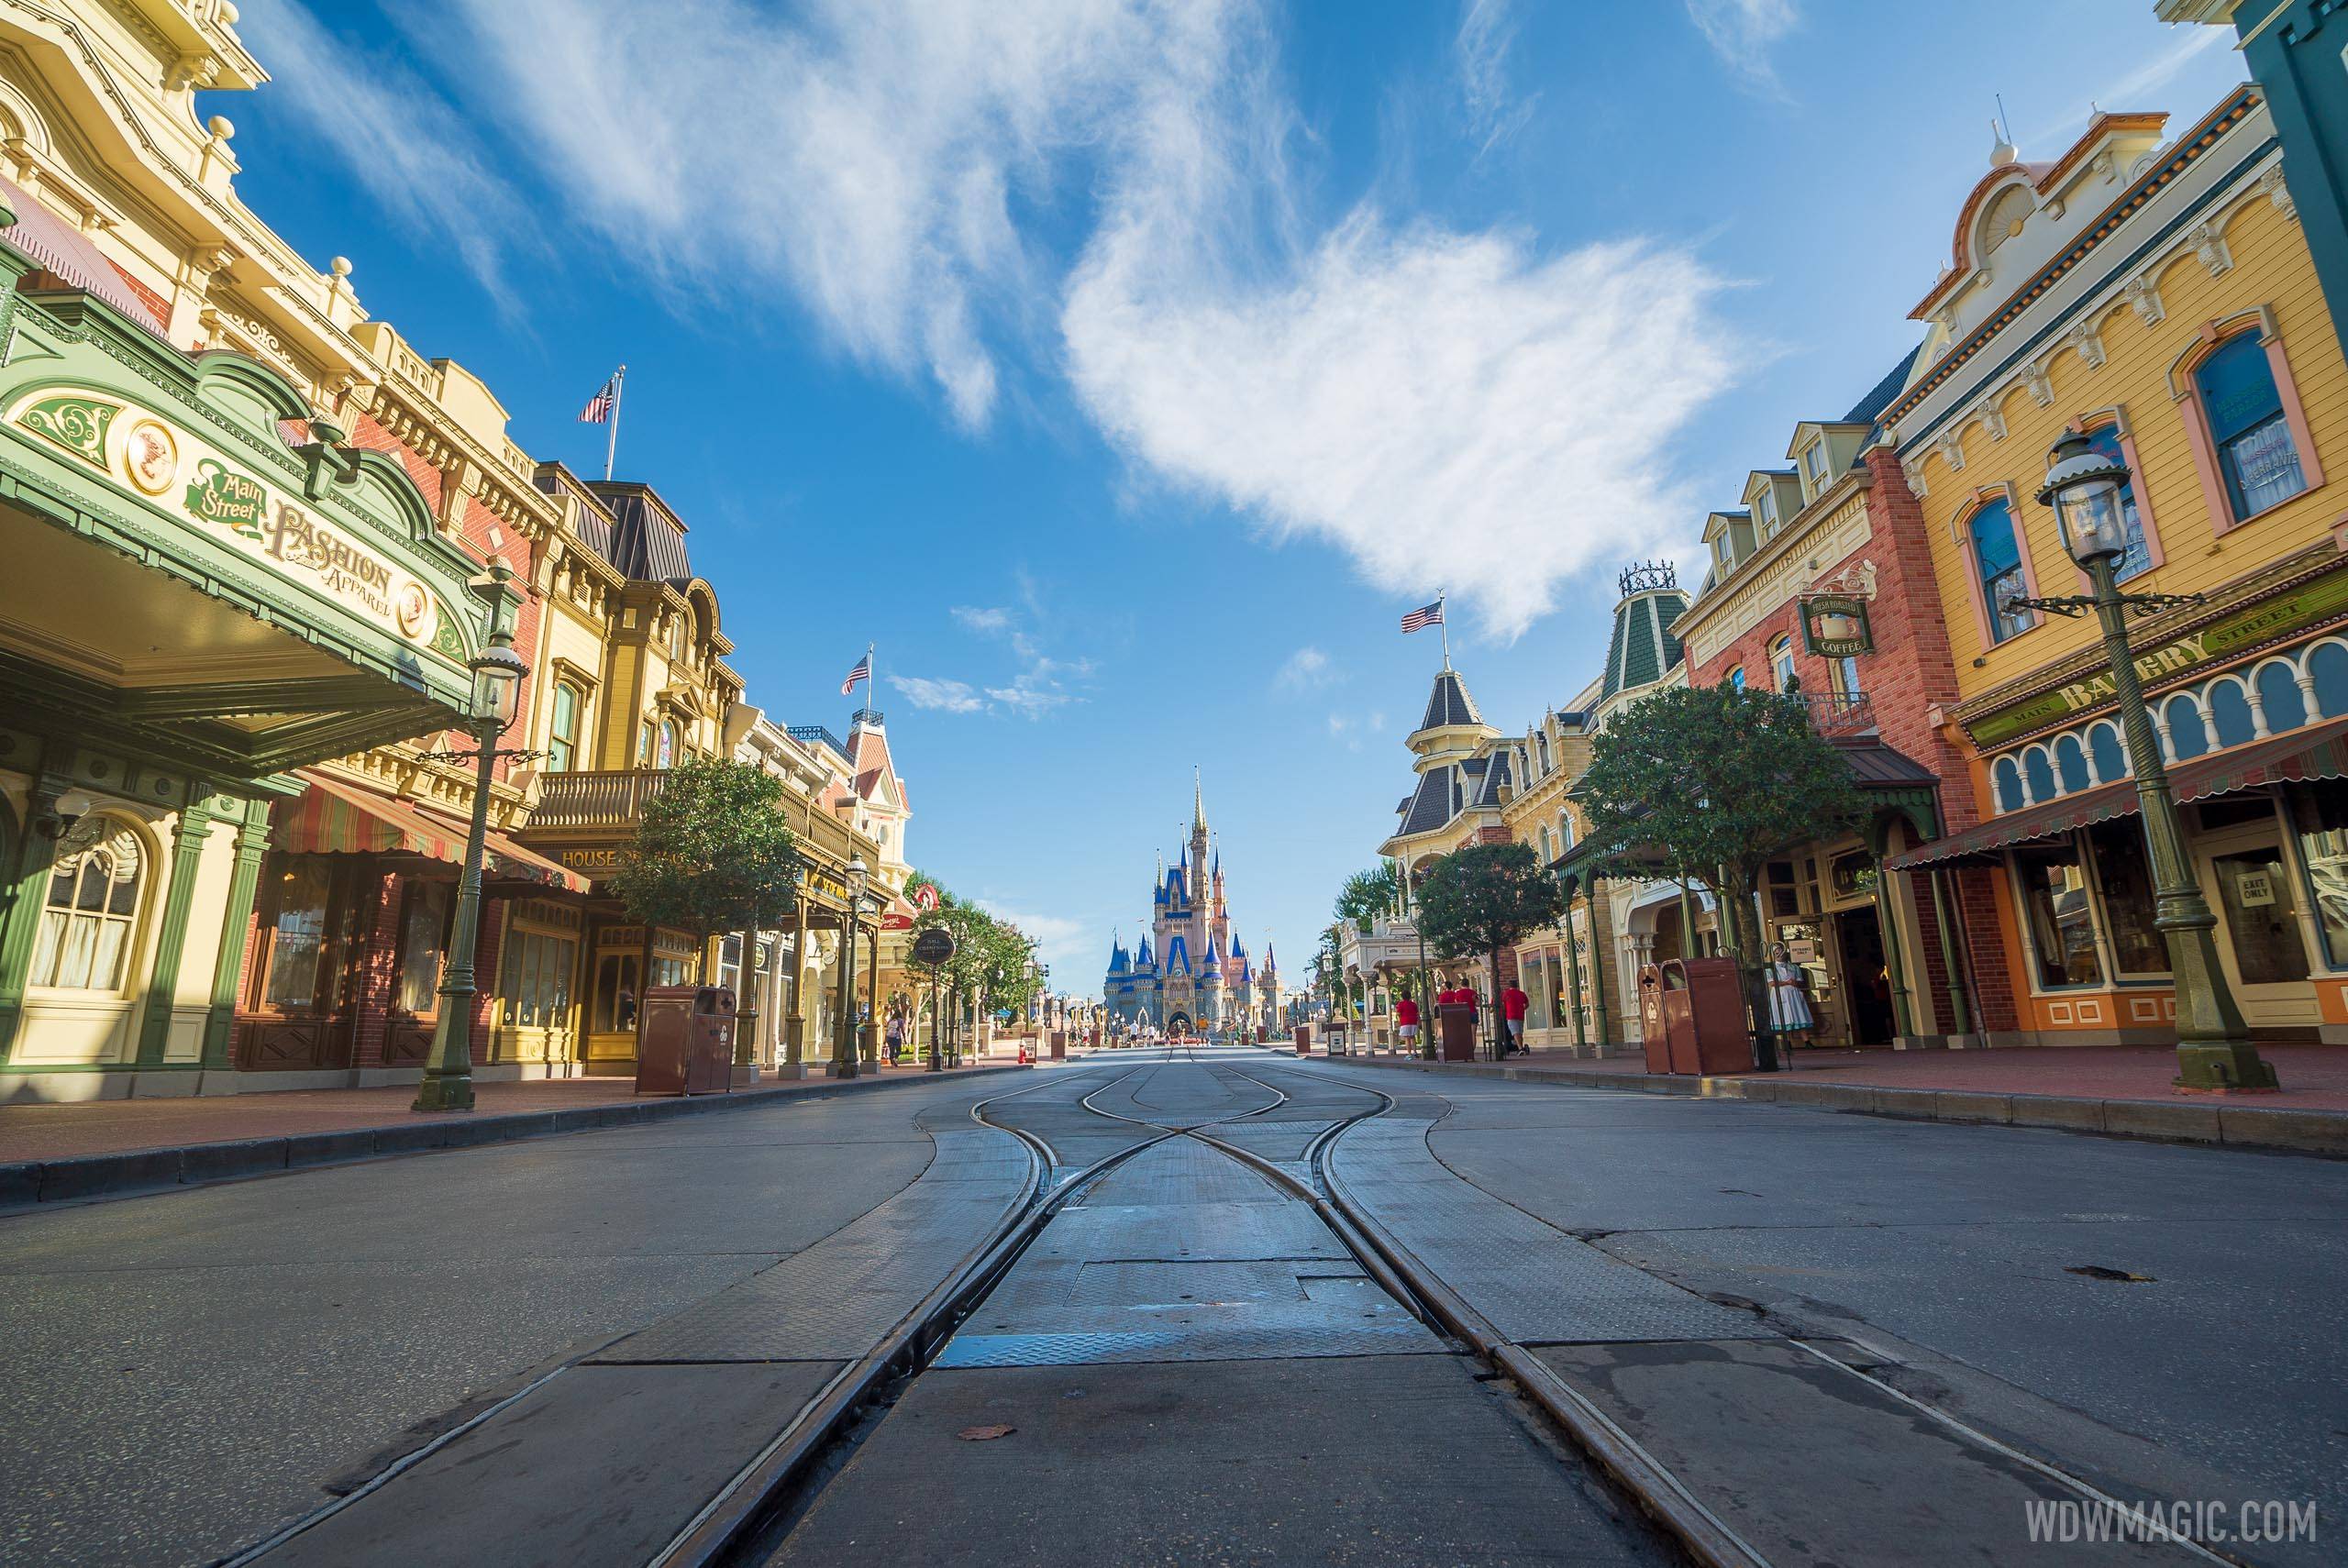 Magic Kingdom will again welcome Cast Members using complimentary admission